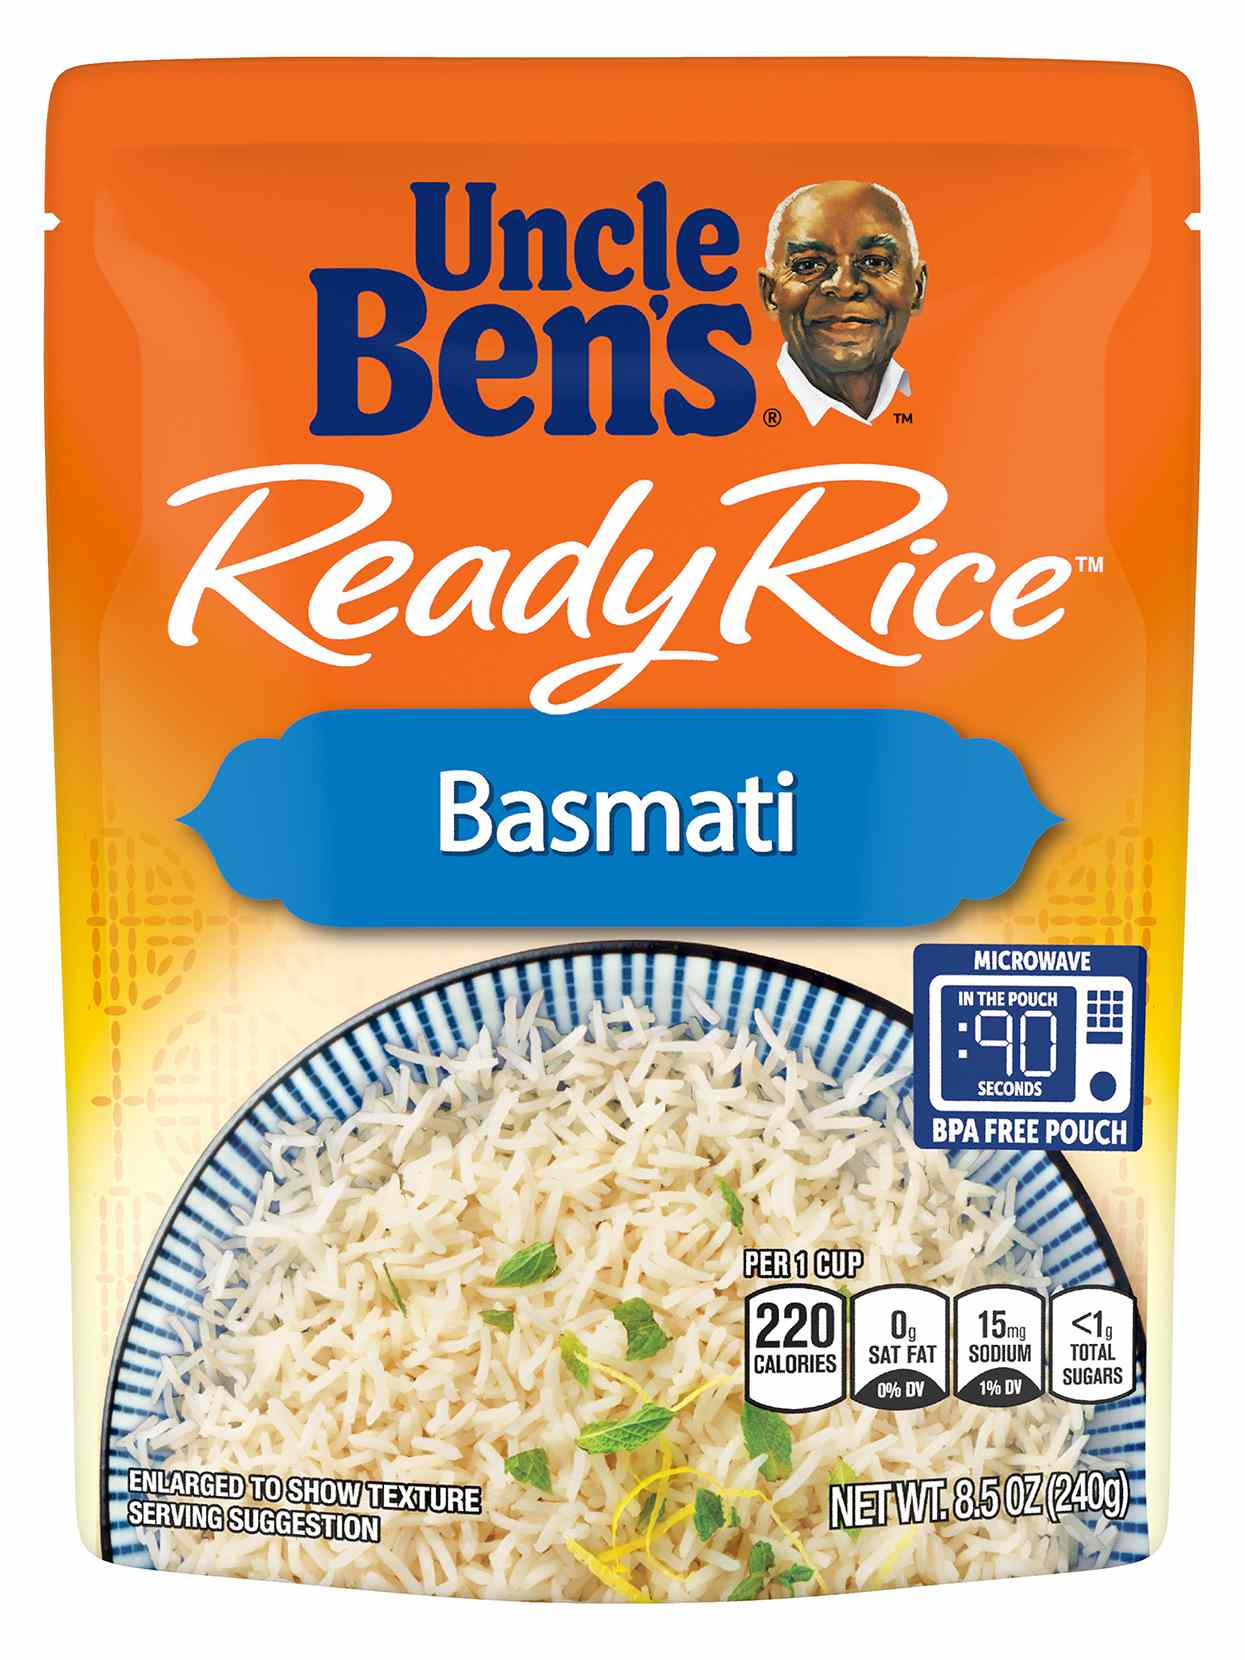 Best Cooked Rice: Uncle Ben's Ready Rice Basmati